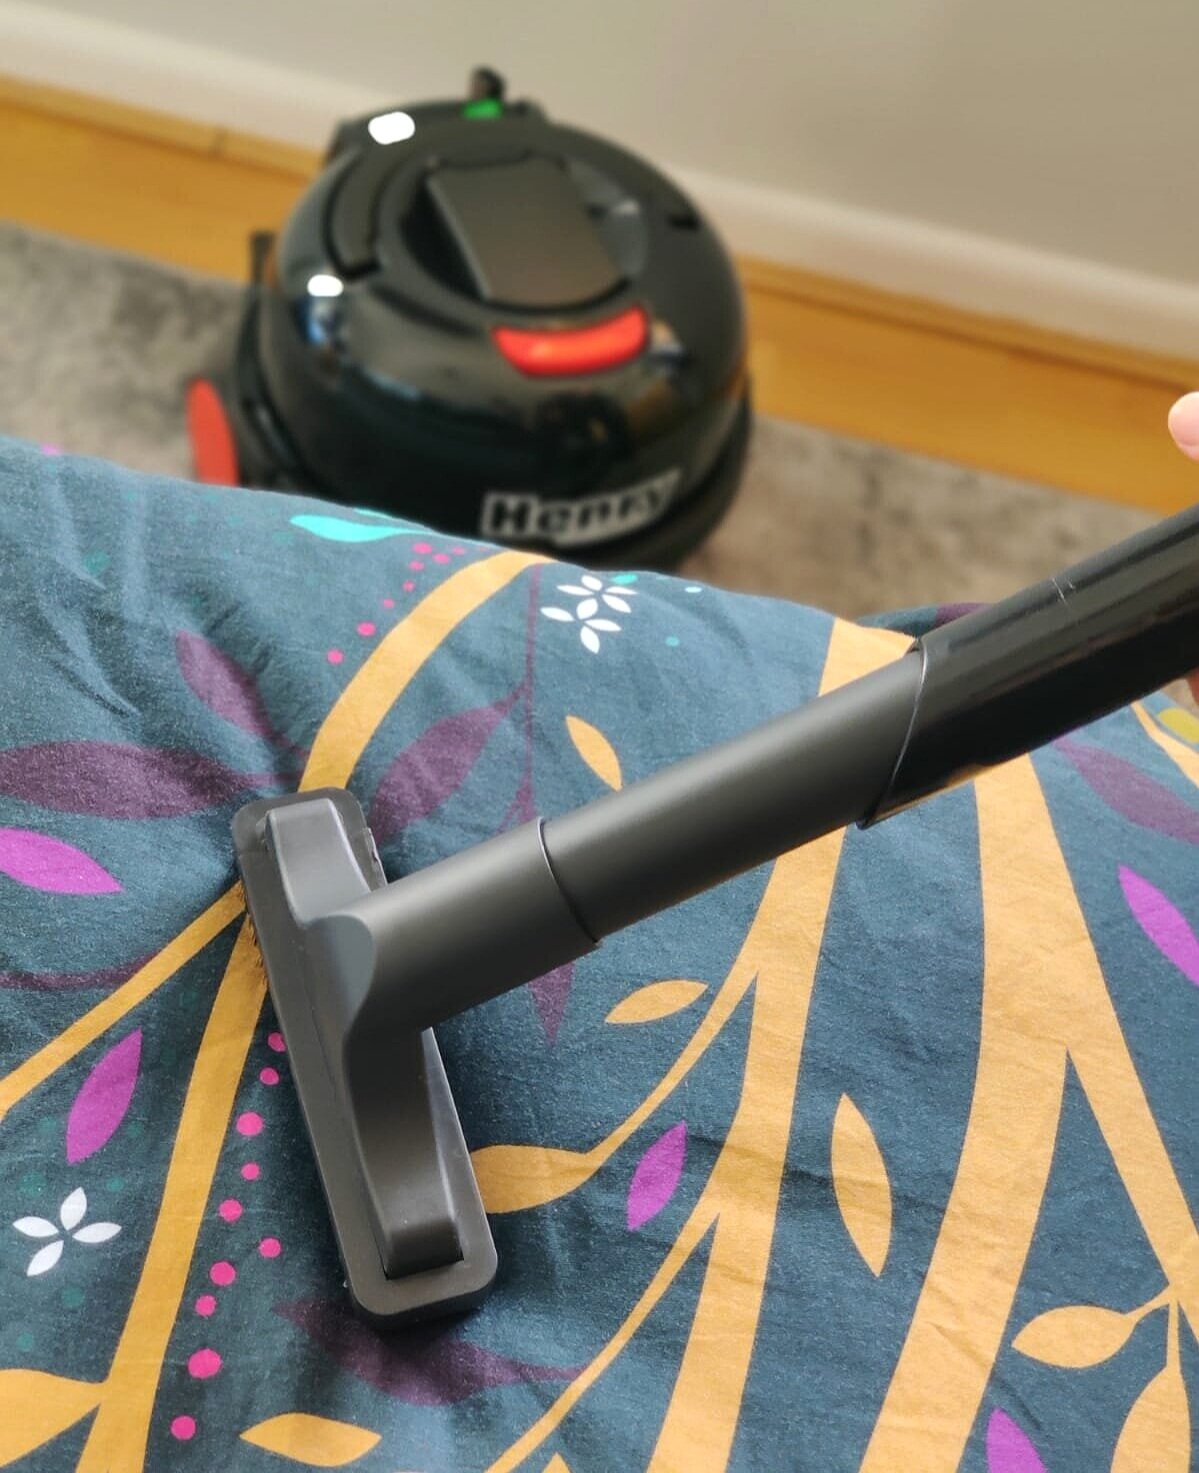 Henry Cordless Vacuum Review